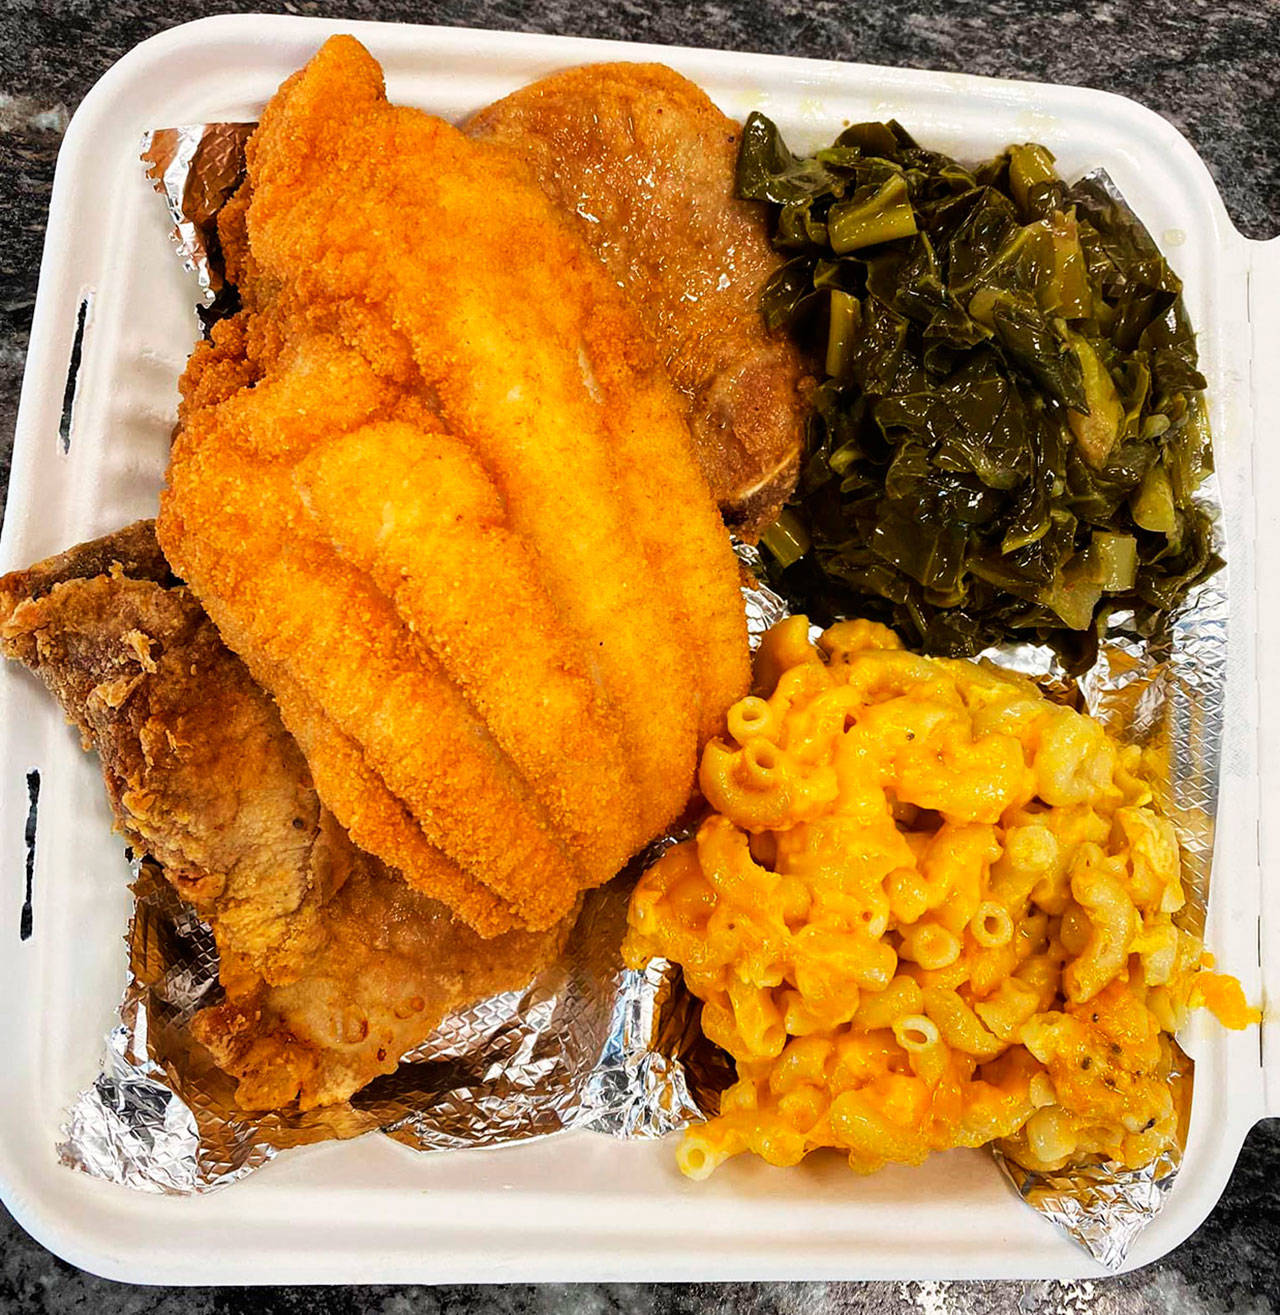 Business stays strong at Nana’s Southern Kitchen in Kent